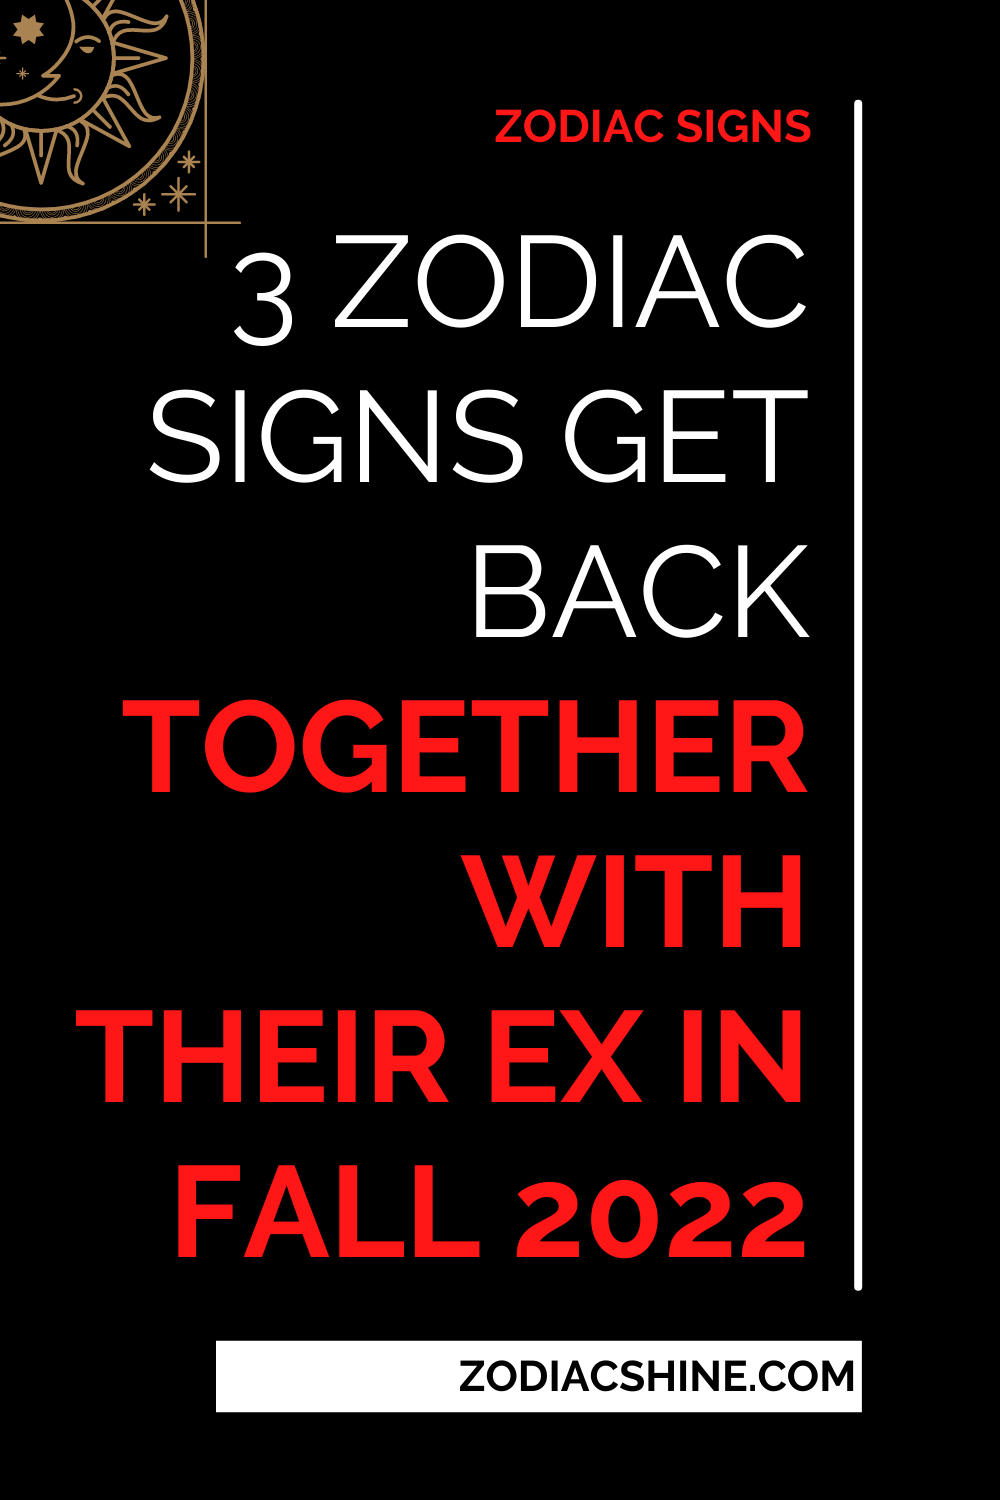 3 Zodiac Signs Get Back Together With Their Ex In Fall 2022